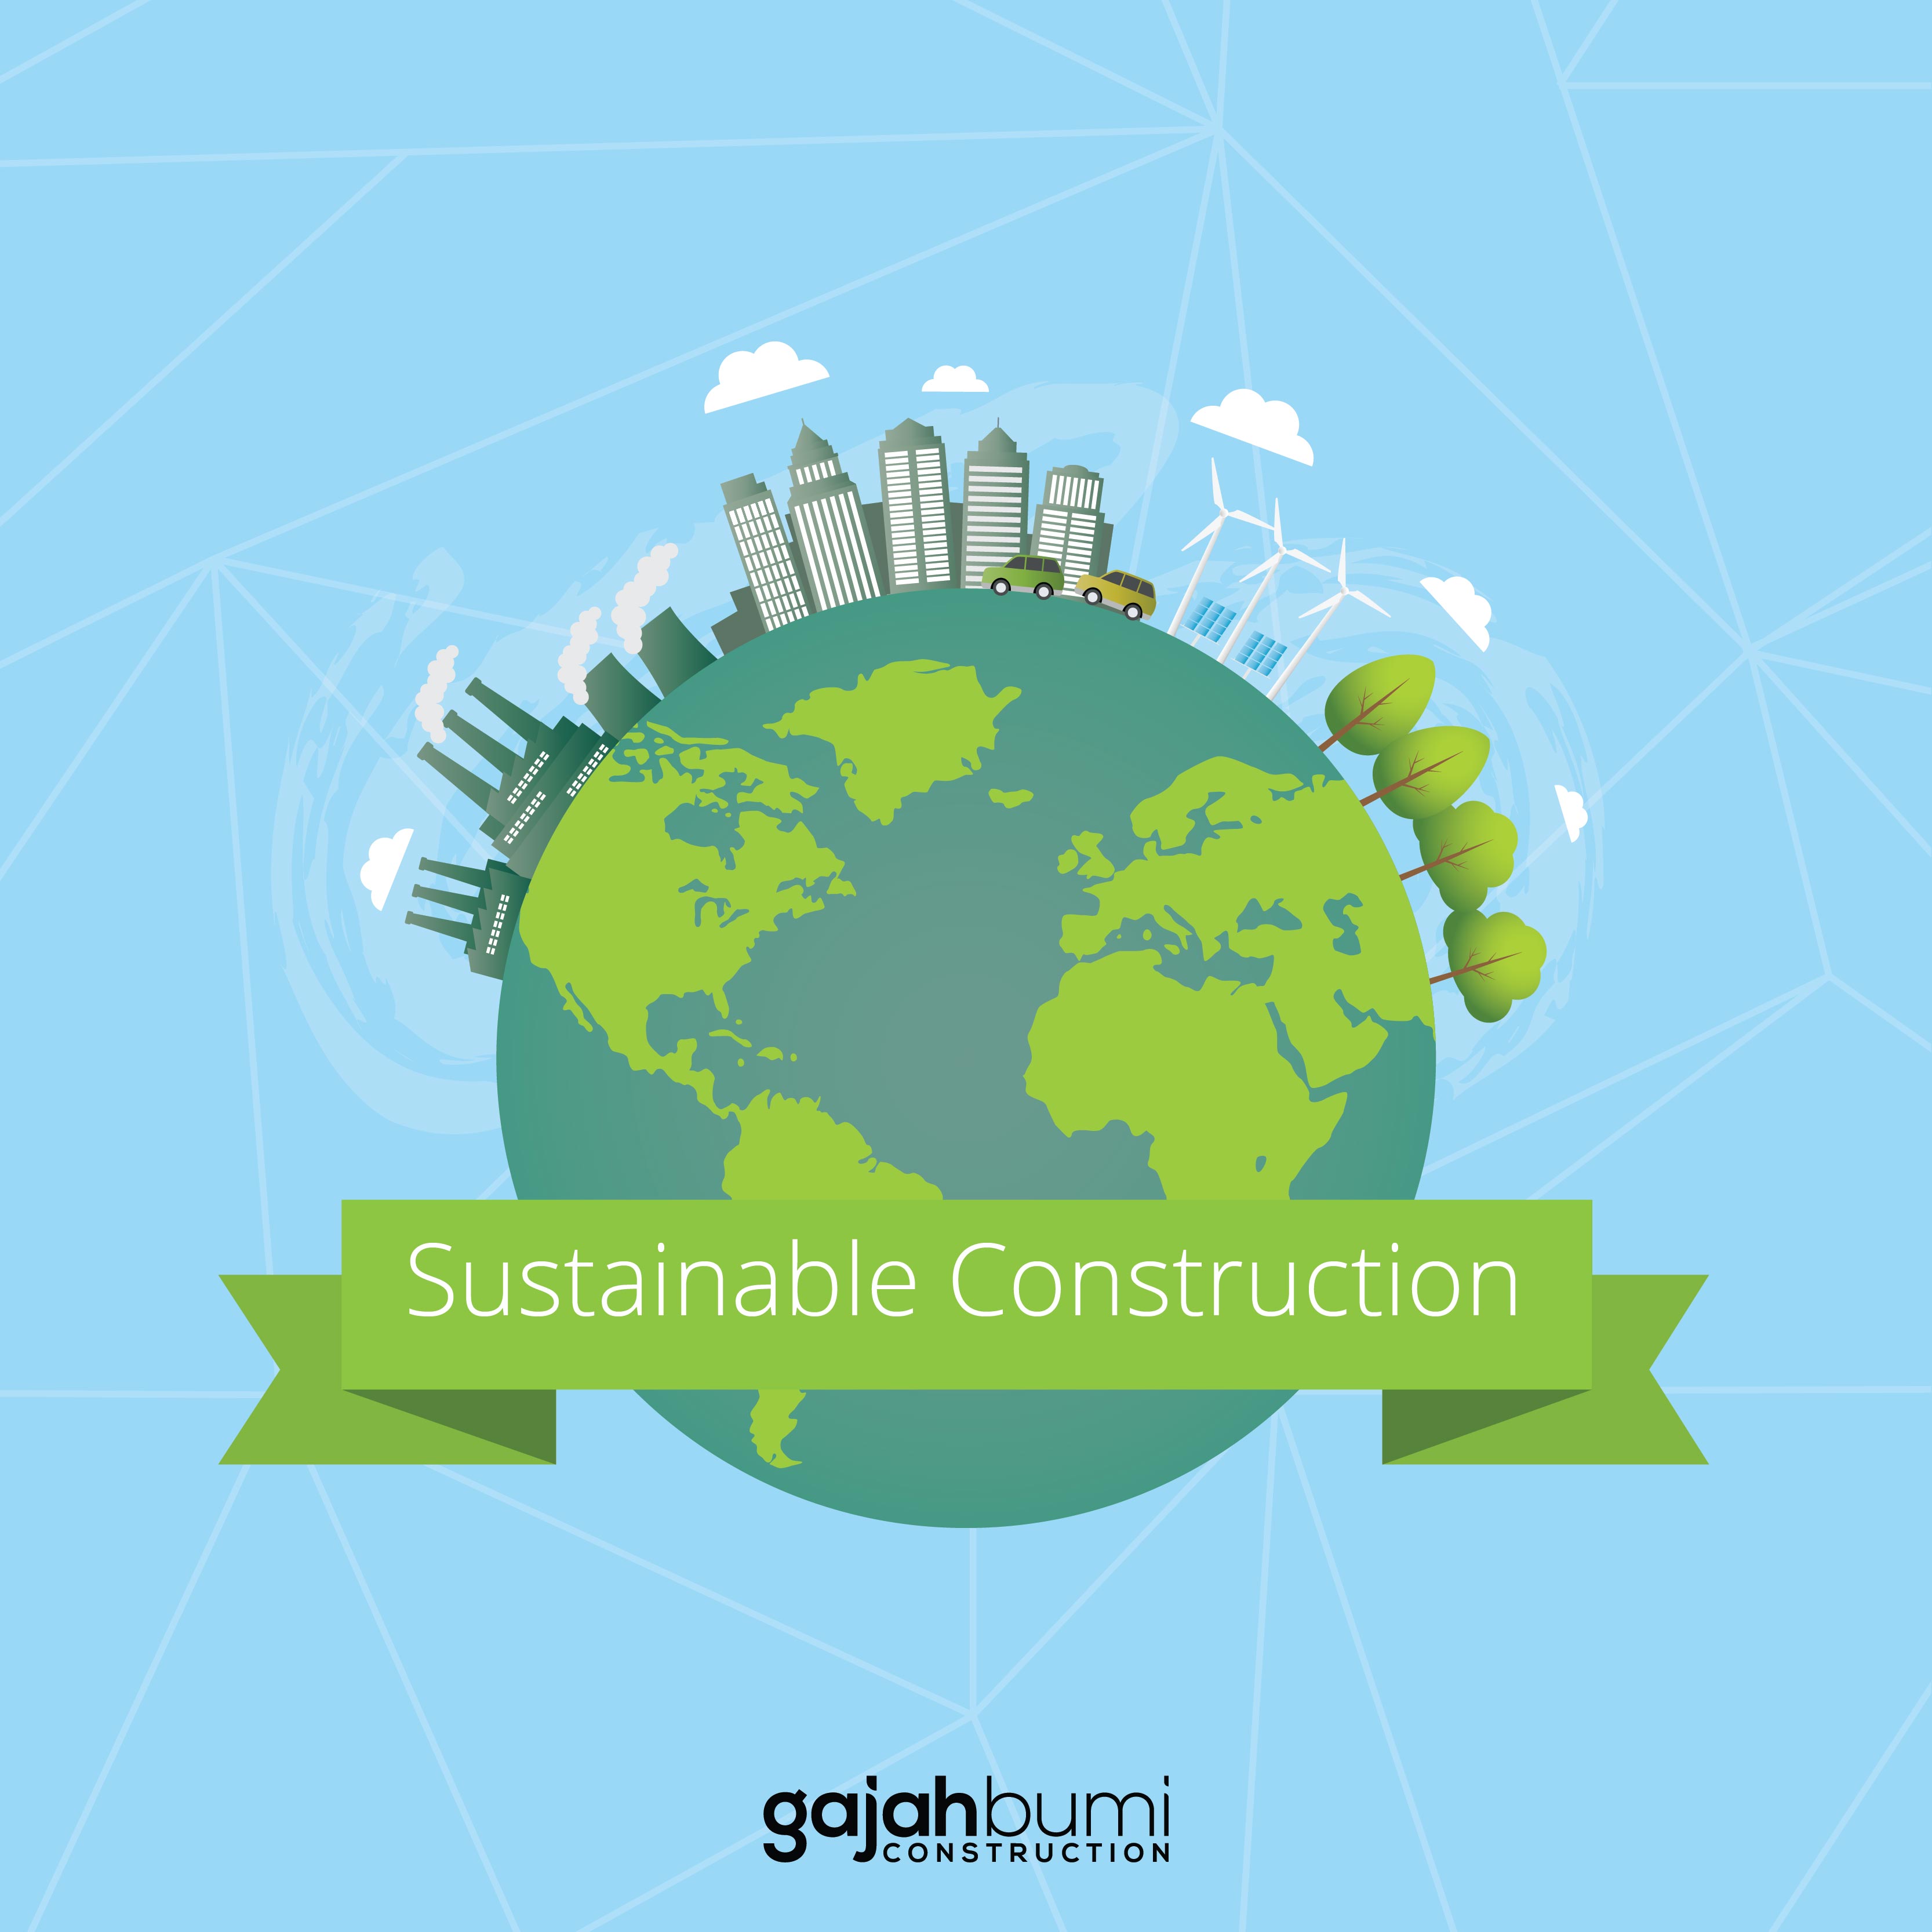 Sustainable Construction and Gajah Bumi